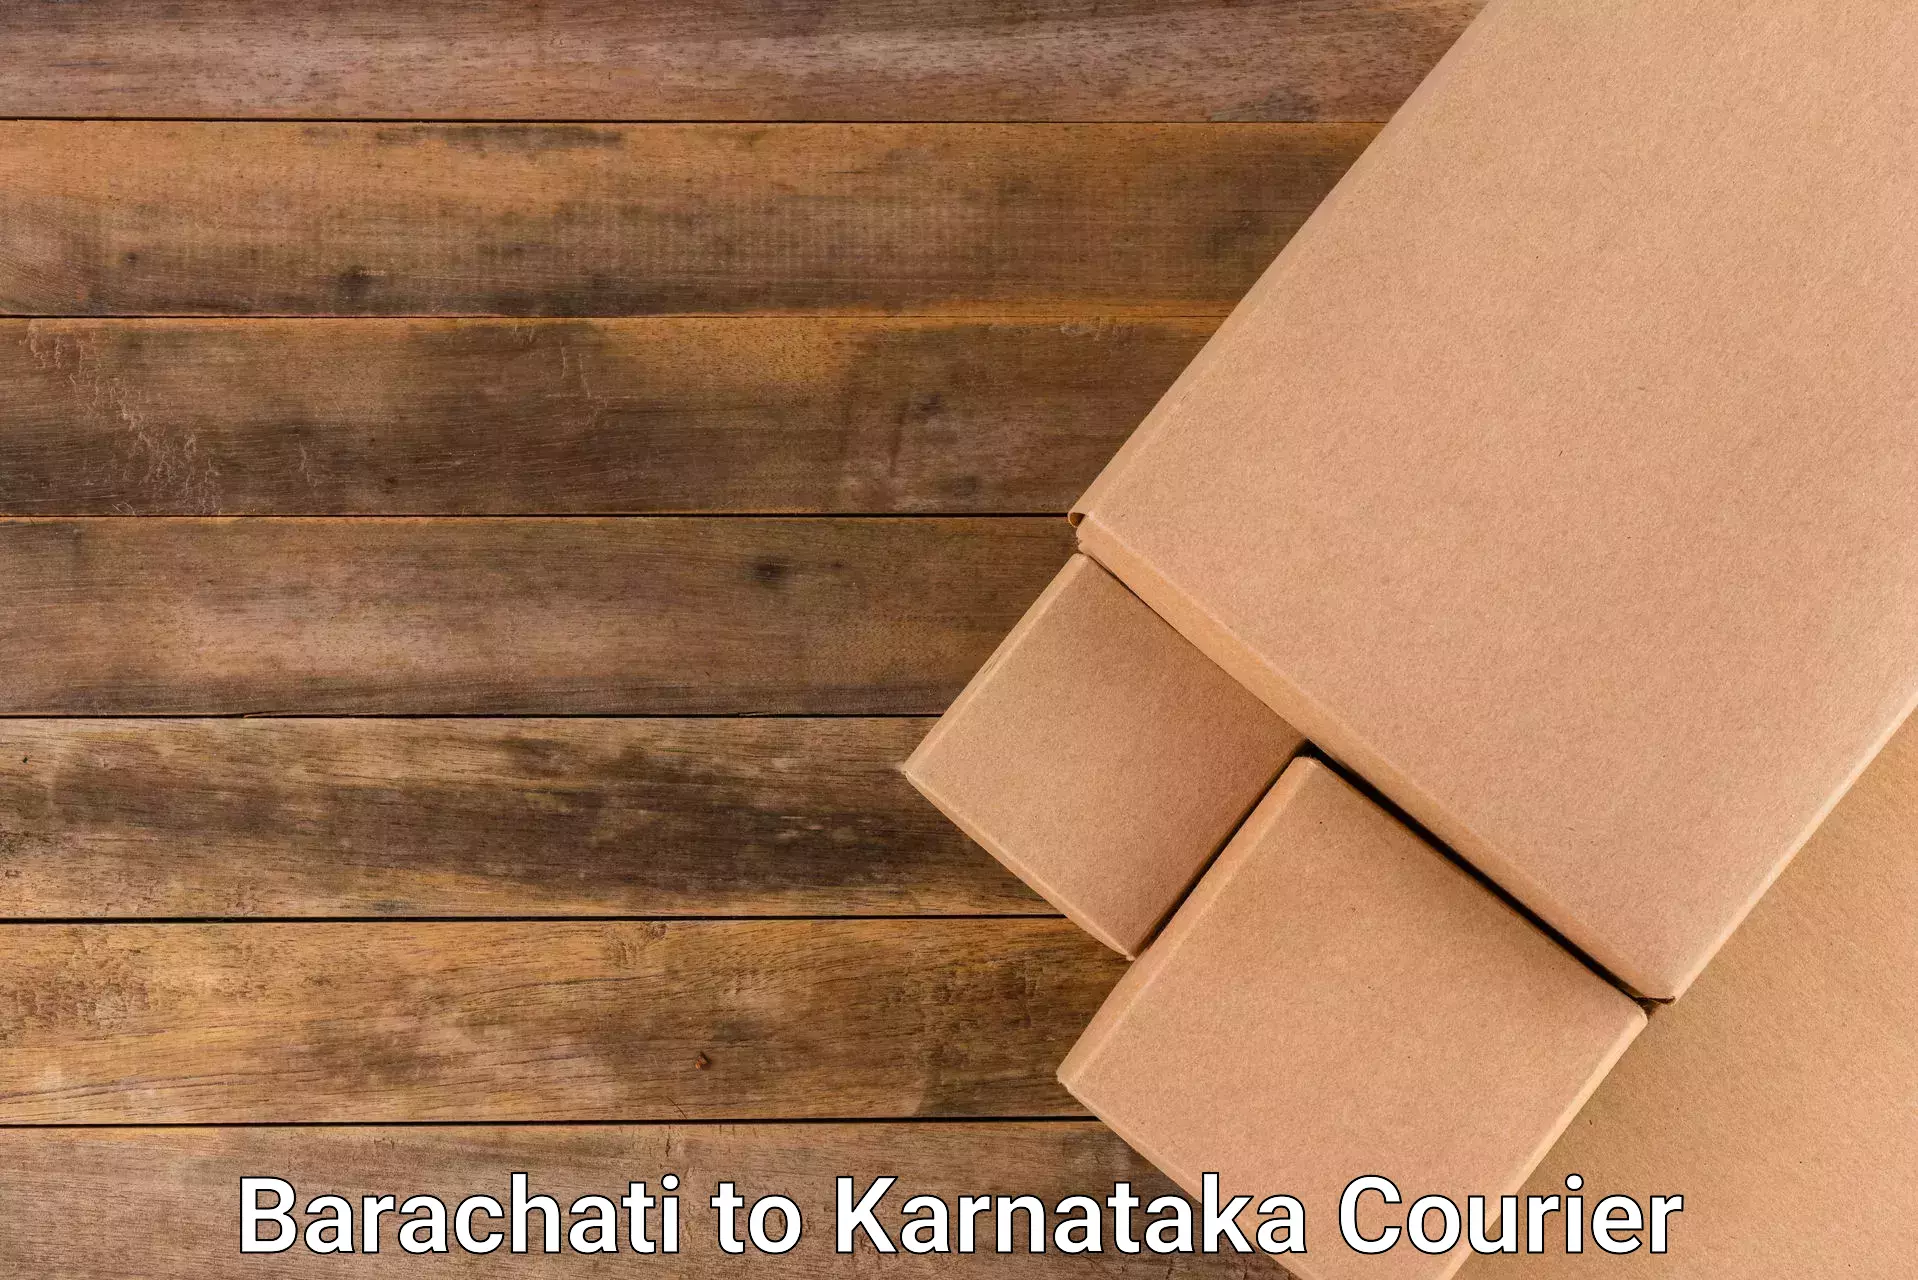 Express delivery solutions Barachati to Bengaluru